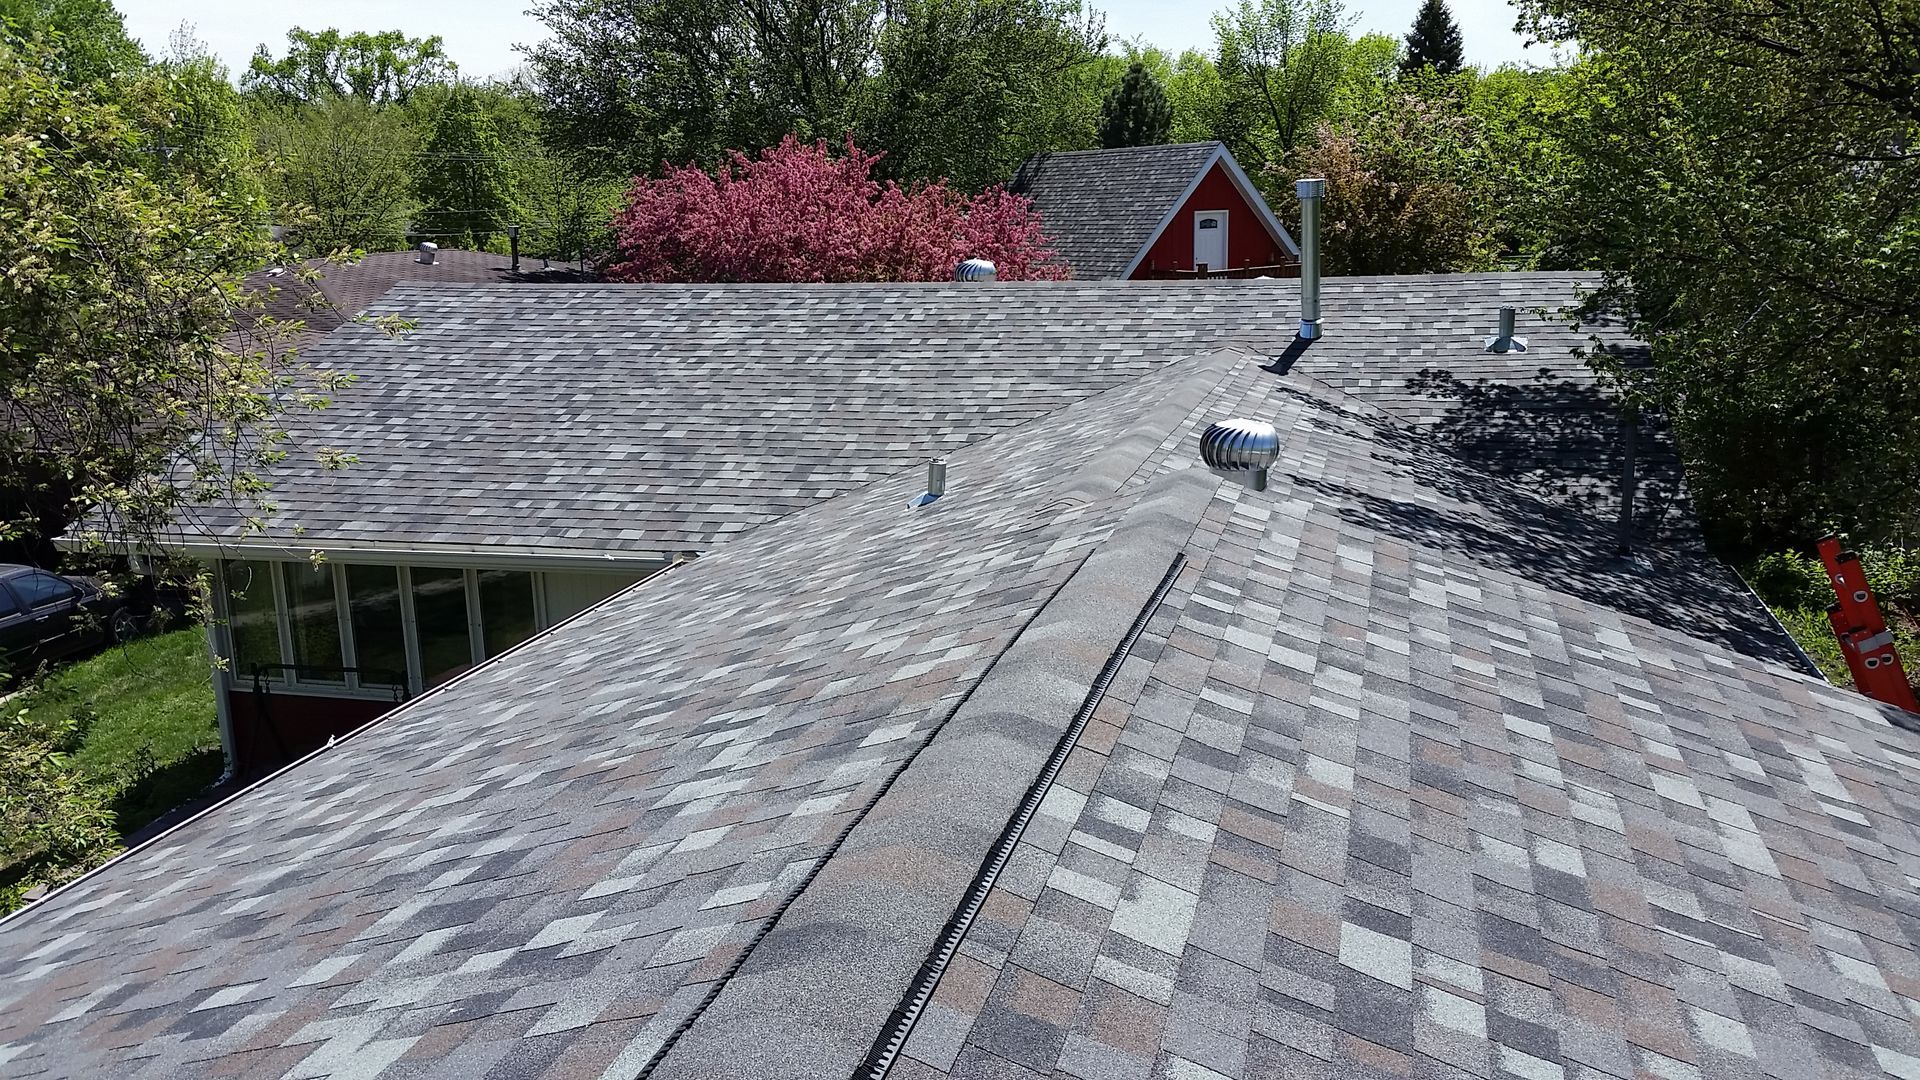 Shingle roof replaced after hail and windstorm damage near Grand Forks, North Dakota